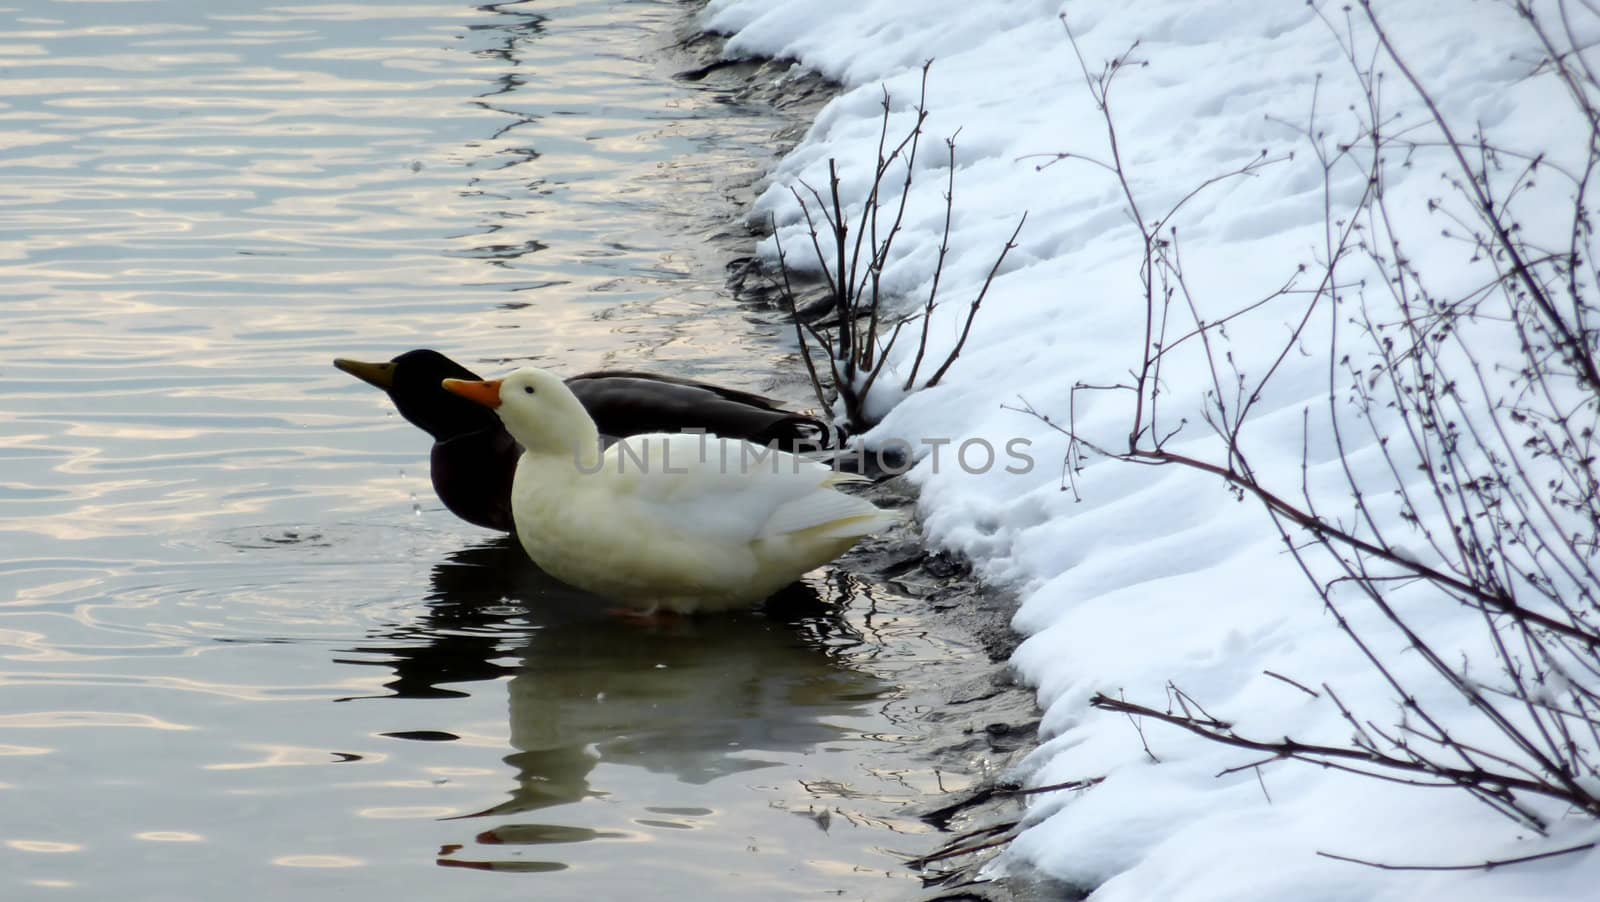 Two ducks in the water near a snowy shore and with little branches without leaves